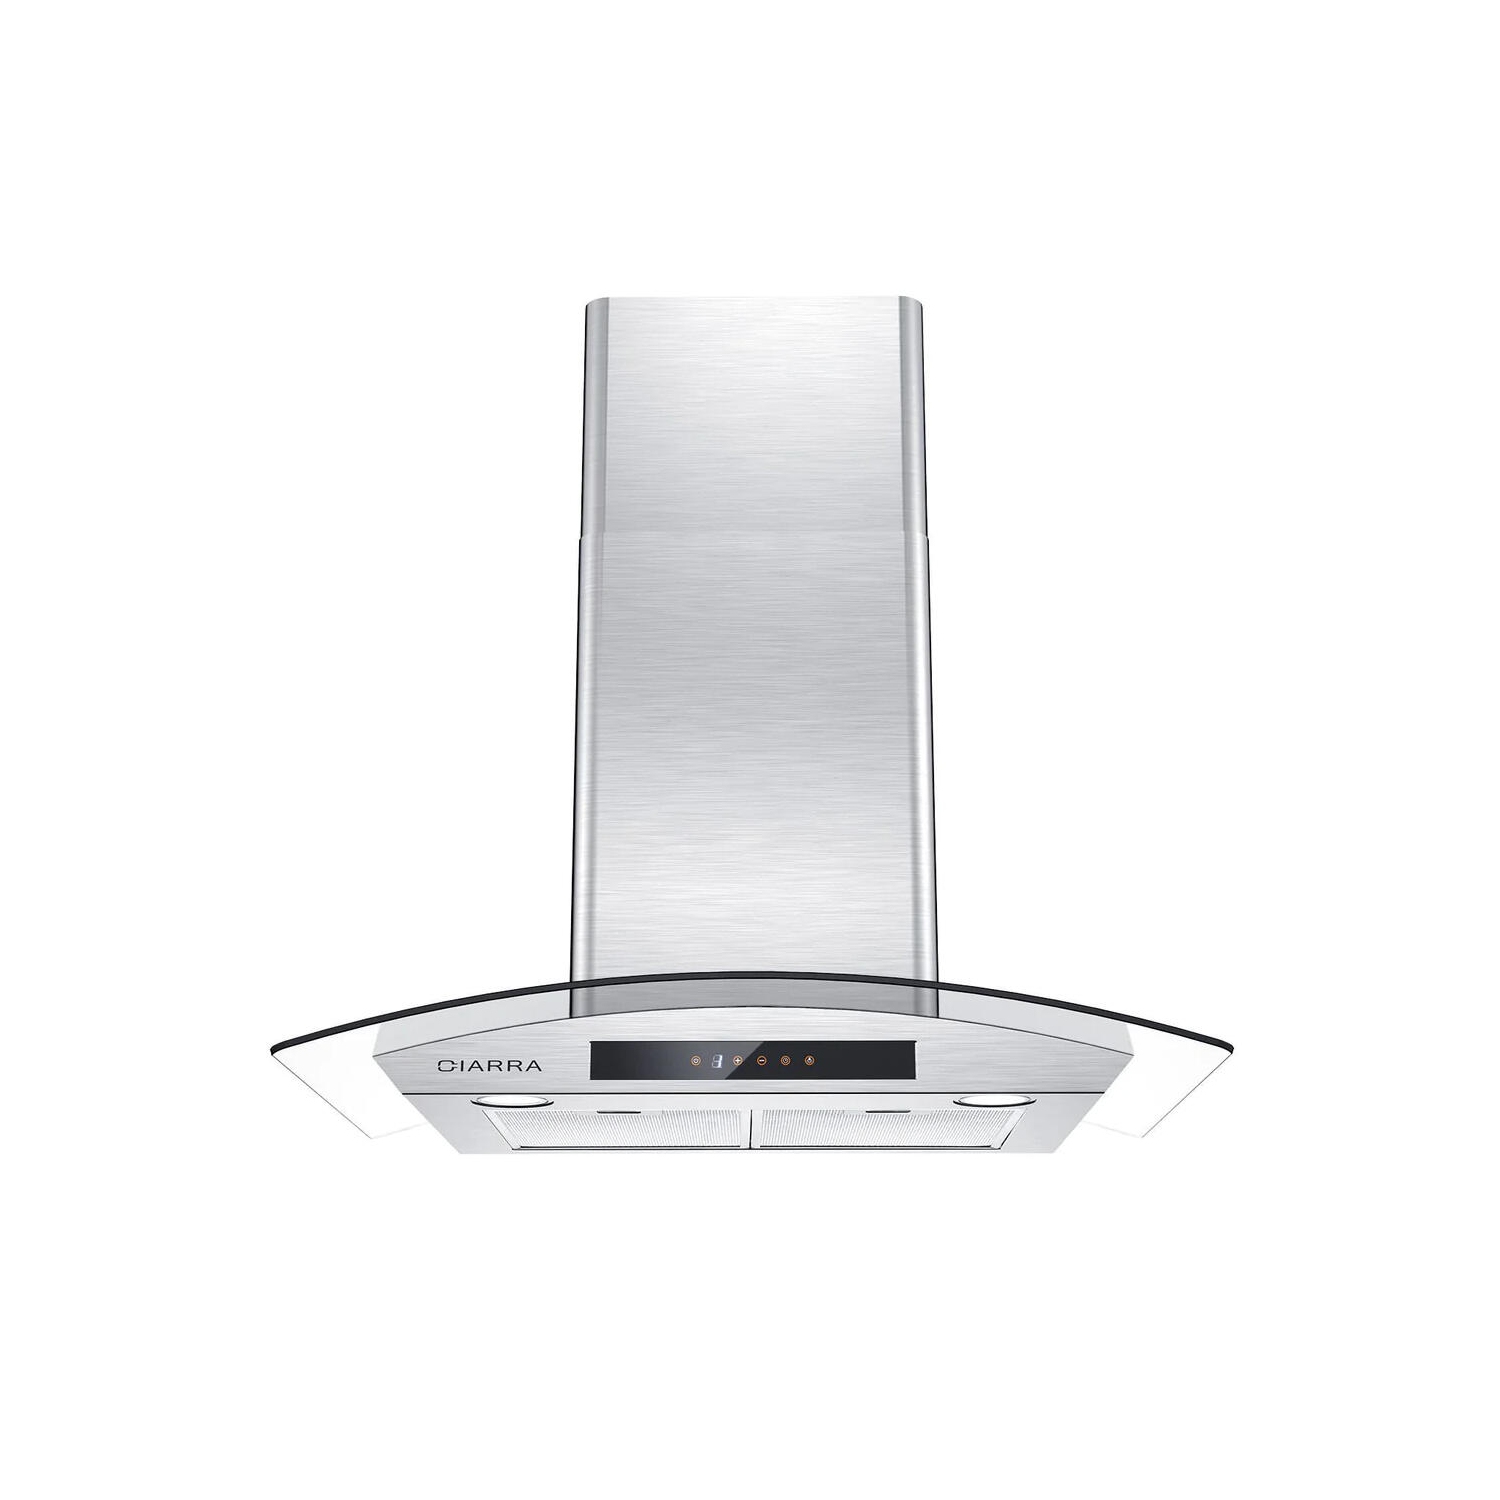 CIARRA 30-Inch Range Hood 450 CFM Wall Mount Vent Hood With Soft Touch Control and Auto Shut Off Function